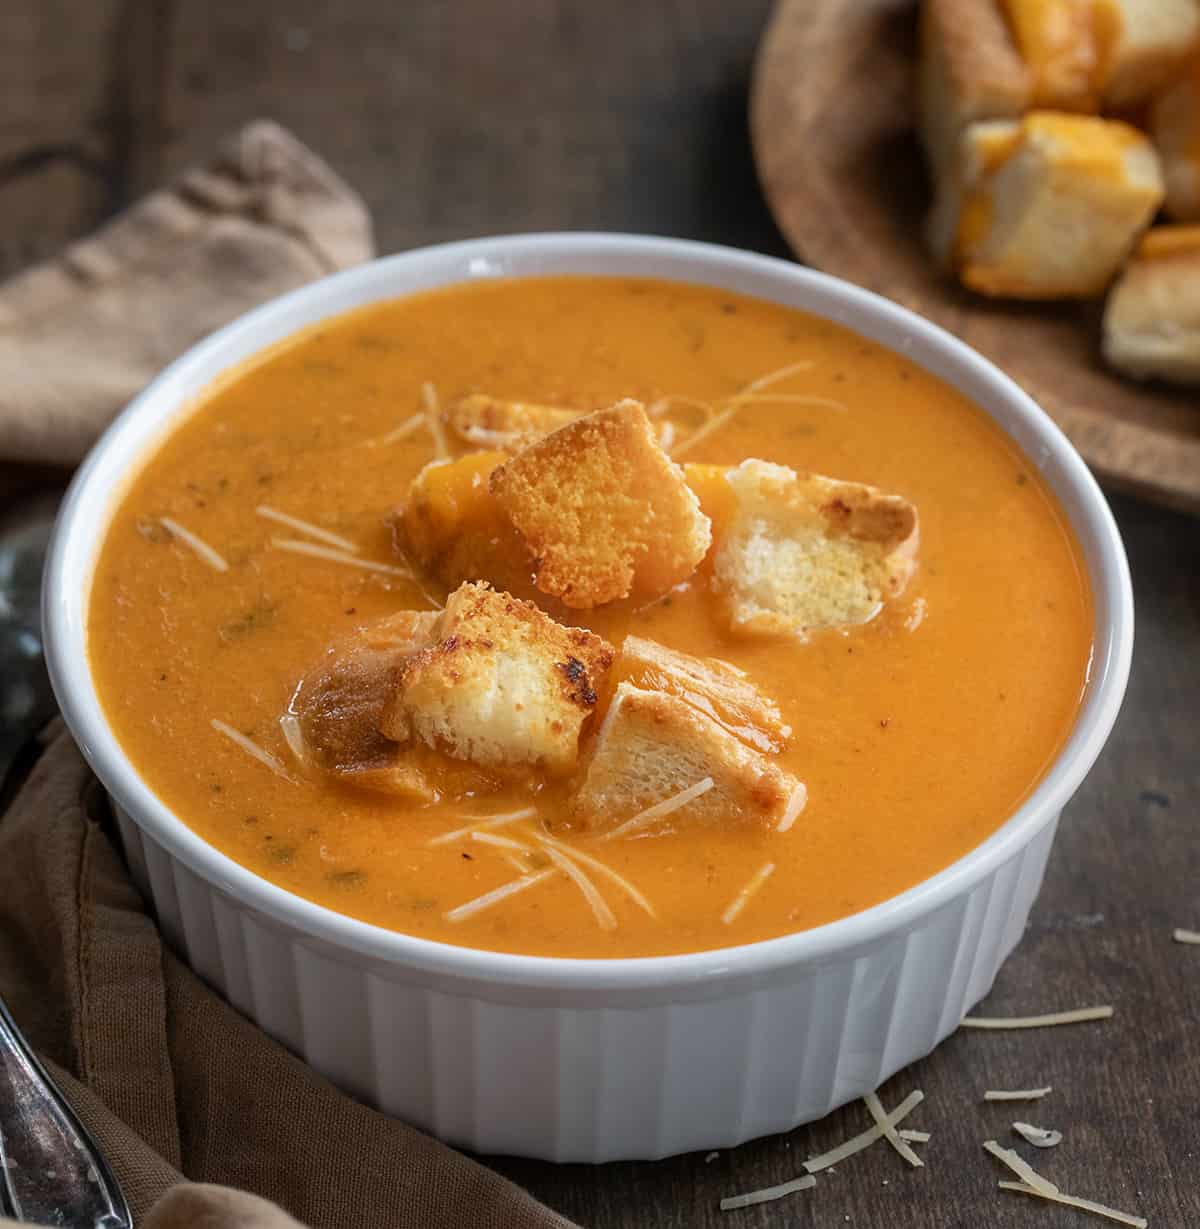 Bowl of Tomato Soup with Grilled Cheese Croutons.